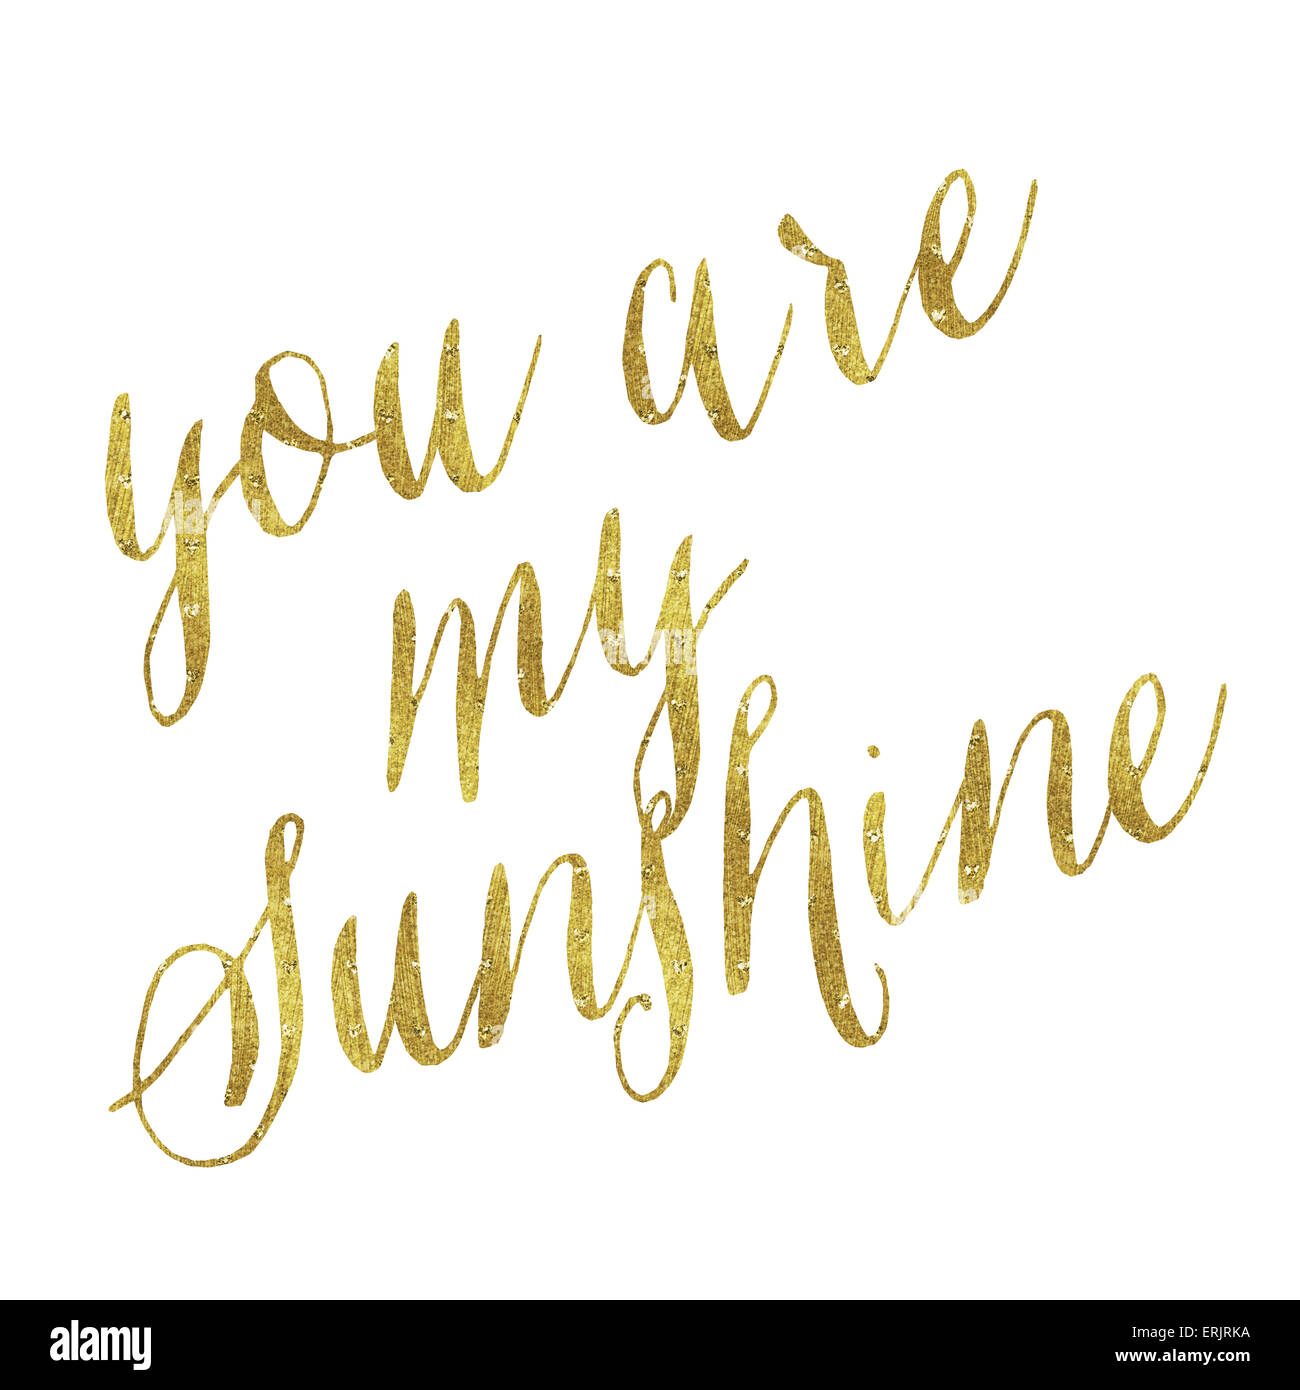 You Are My Sunshine Gold Faux Foil Metallic Glitter Inspirational Quote Isolated on White Stock Photo